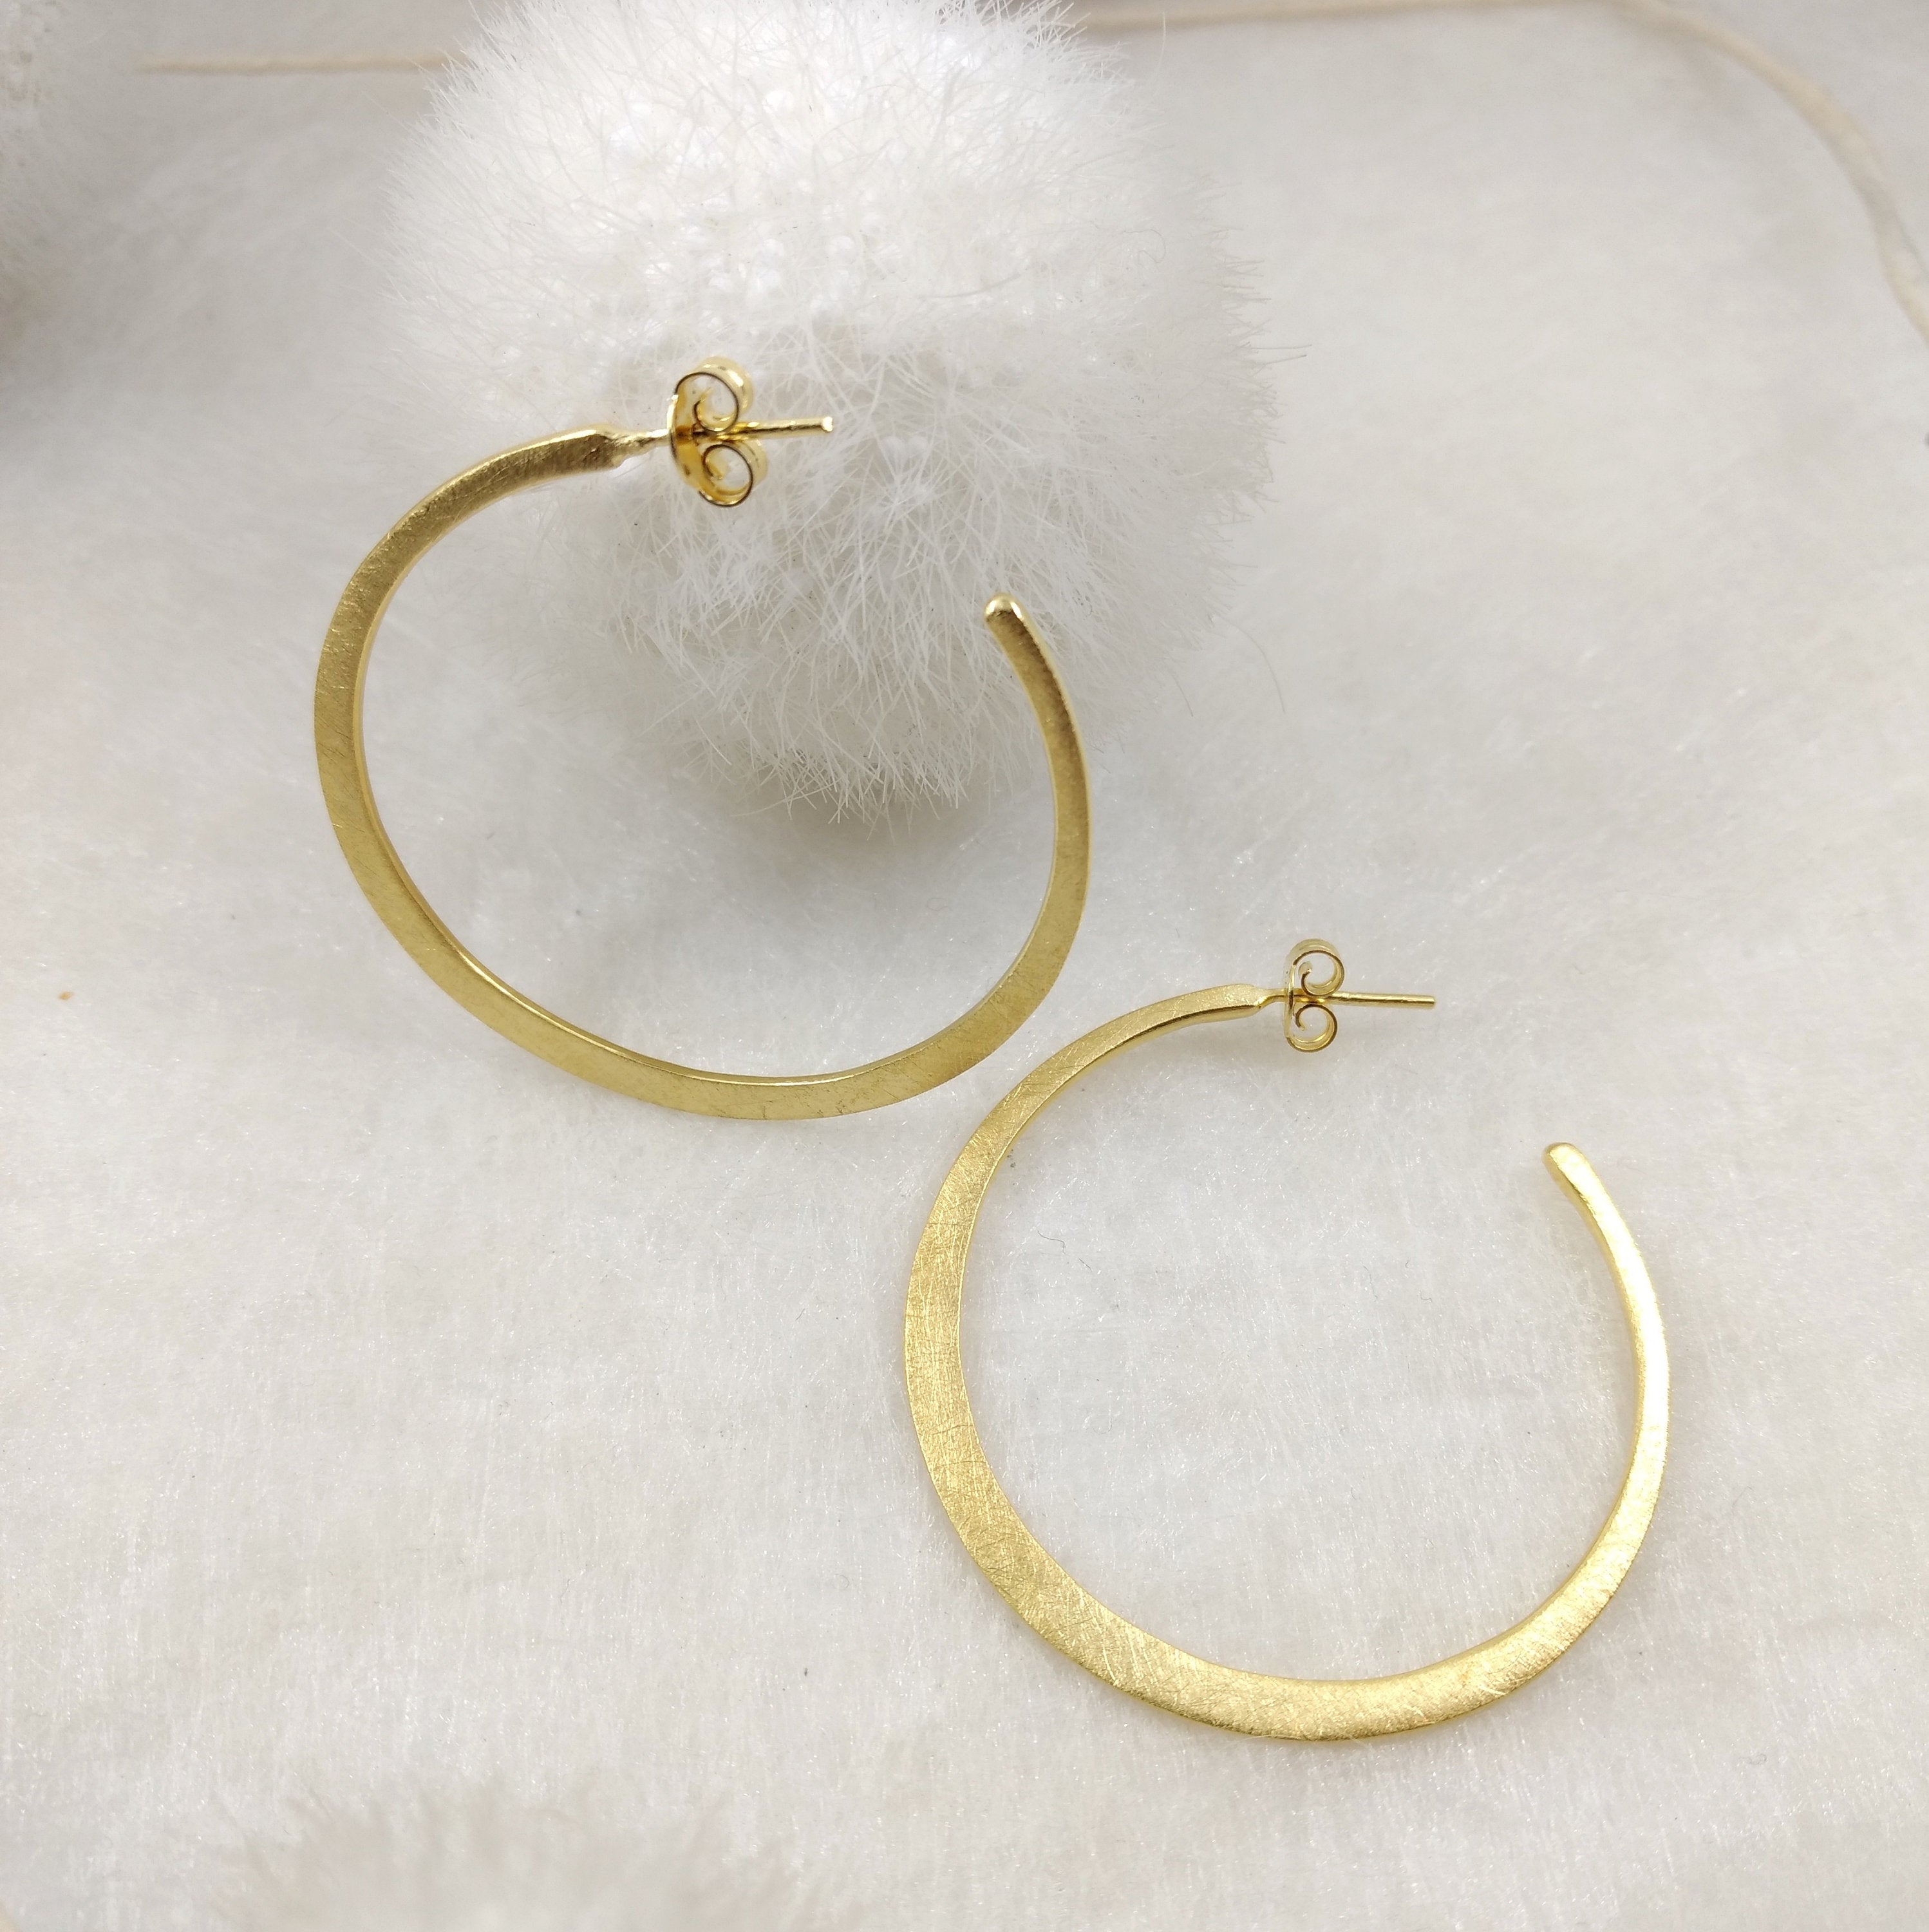 OMeGa - big Sterling Silver hoops, available in 2 finishes